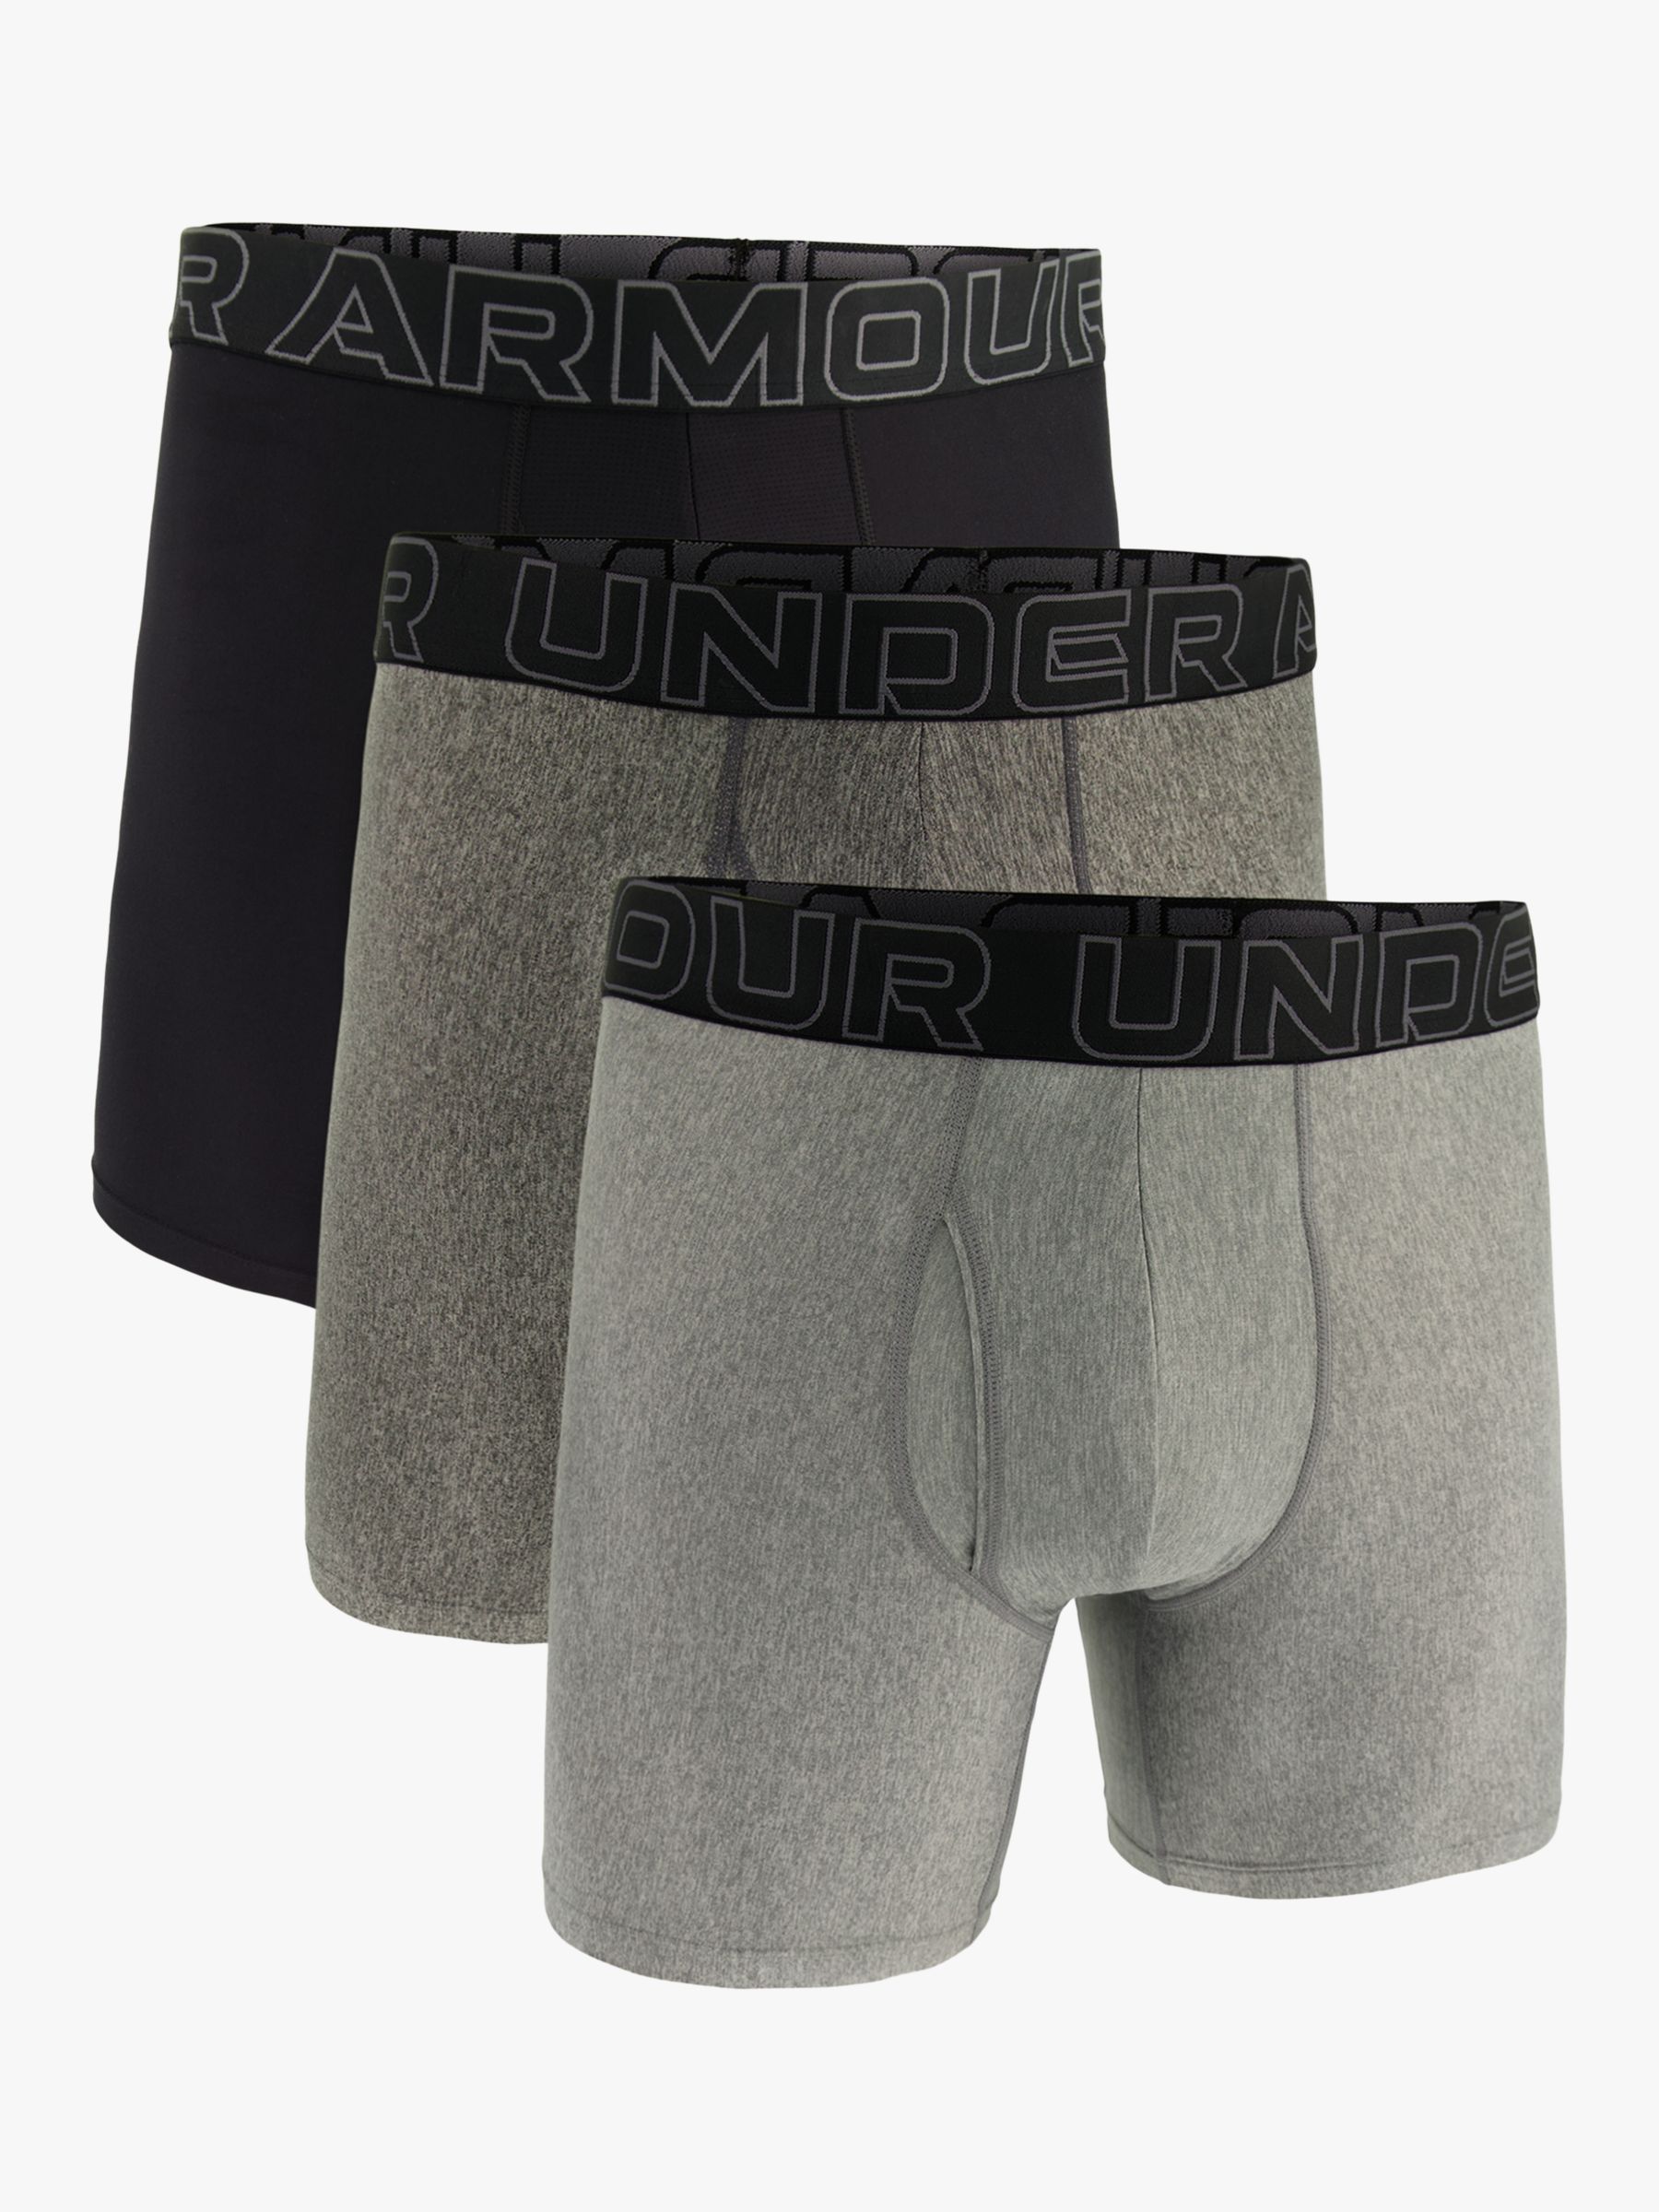 Under Armour Tech 6" Boxers, Pack of 3, Black/Grey/Charcoal, S